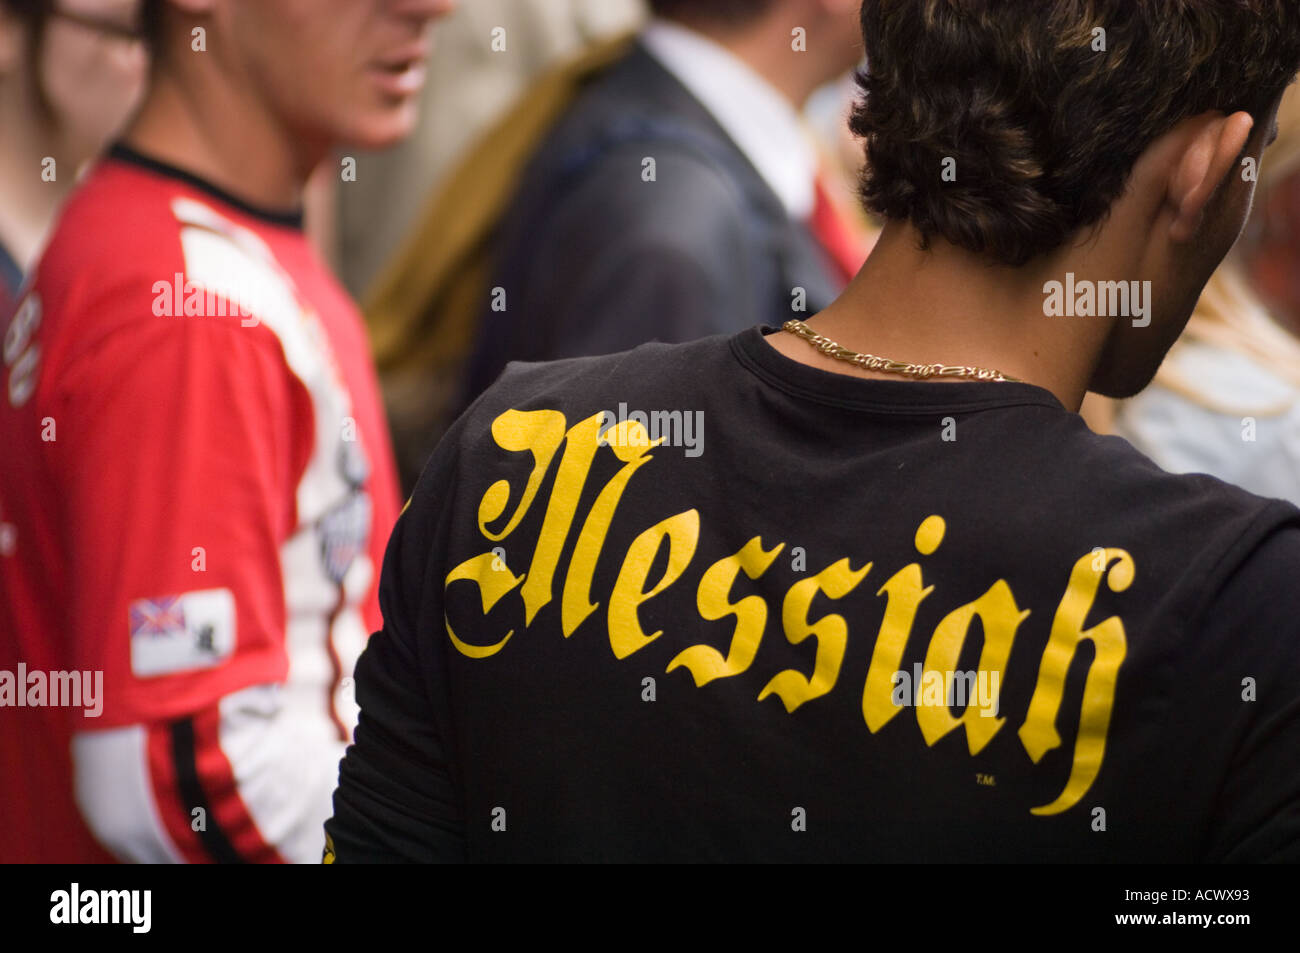 Color horizontal image of a young man from the back wearing a t shirt emblazzoned with the word Messiah in a crowd of people Stock Photo